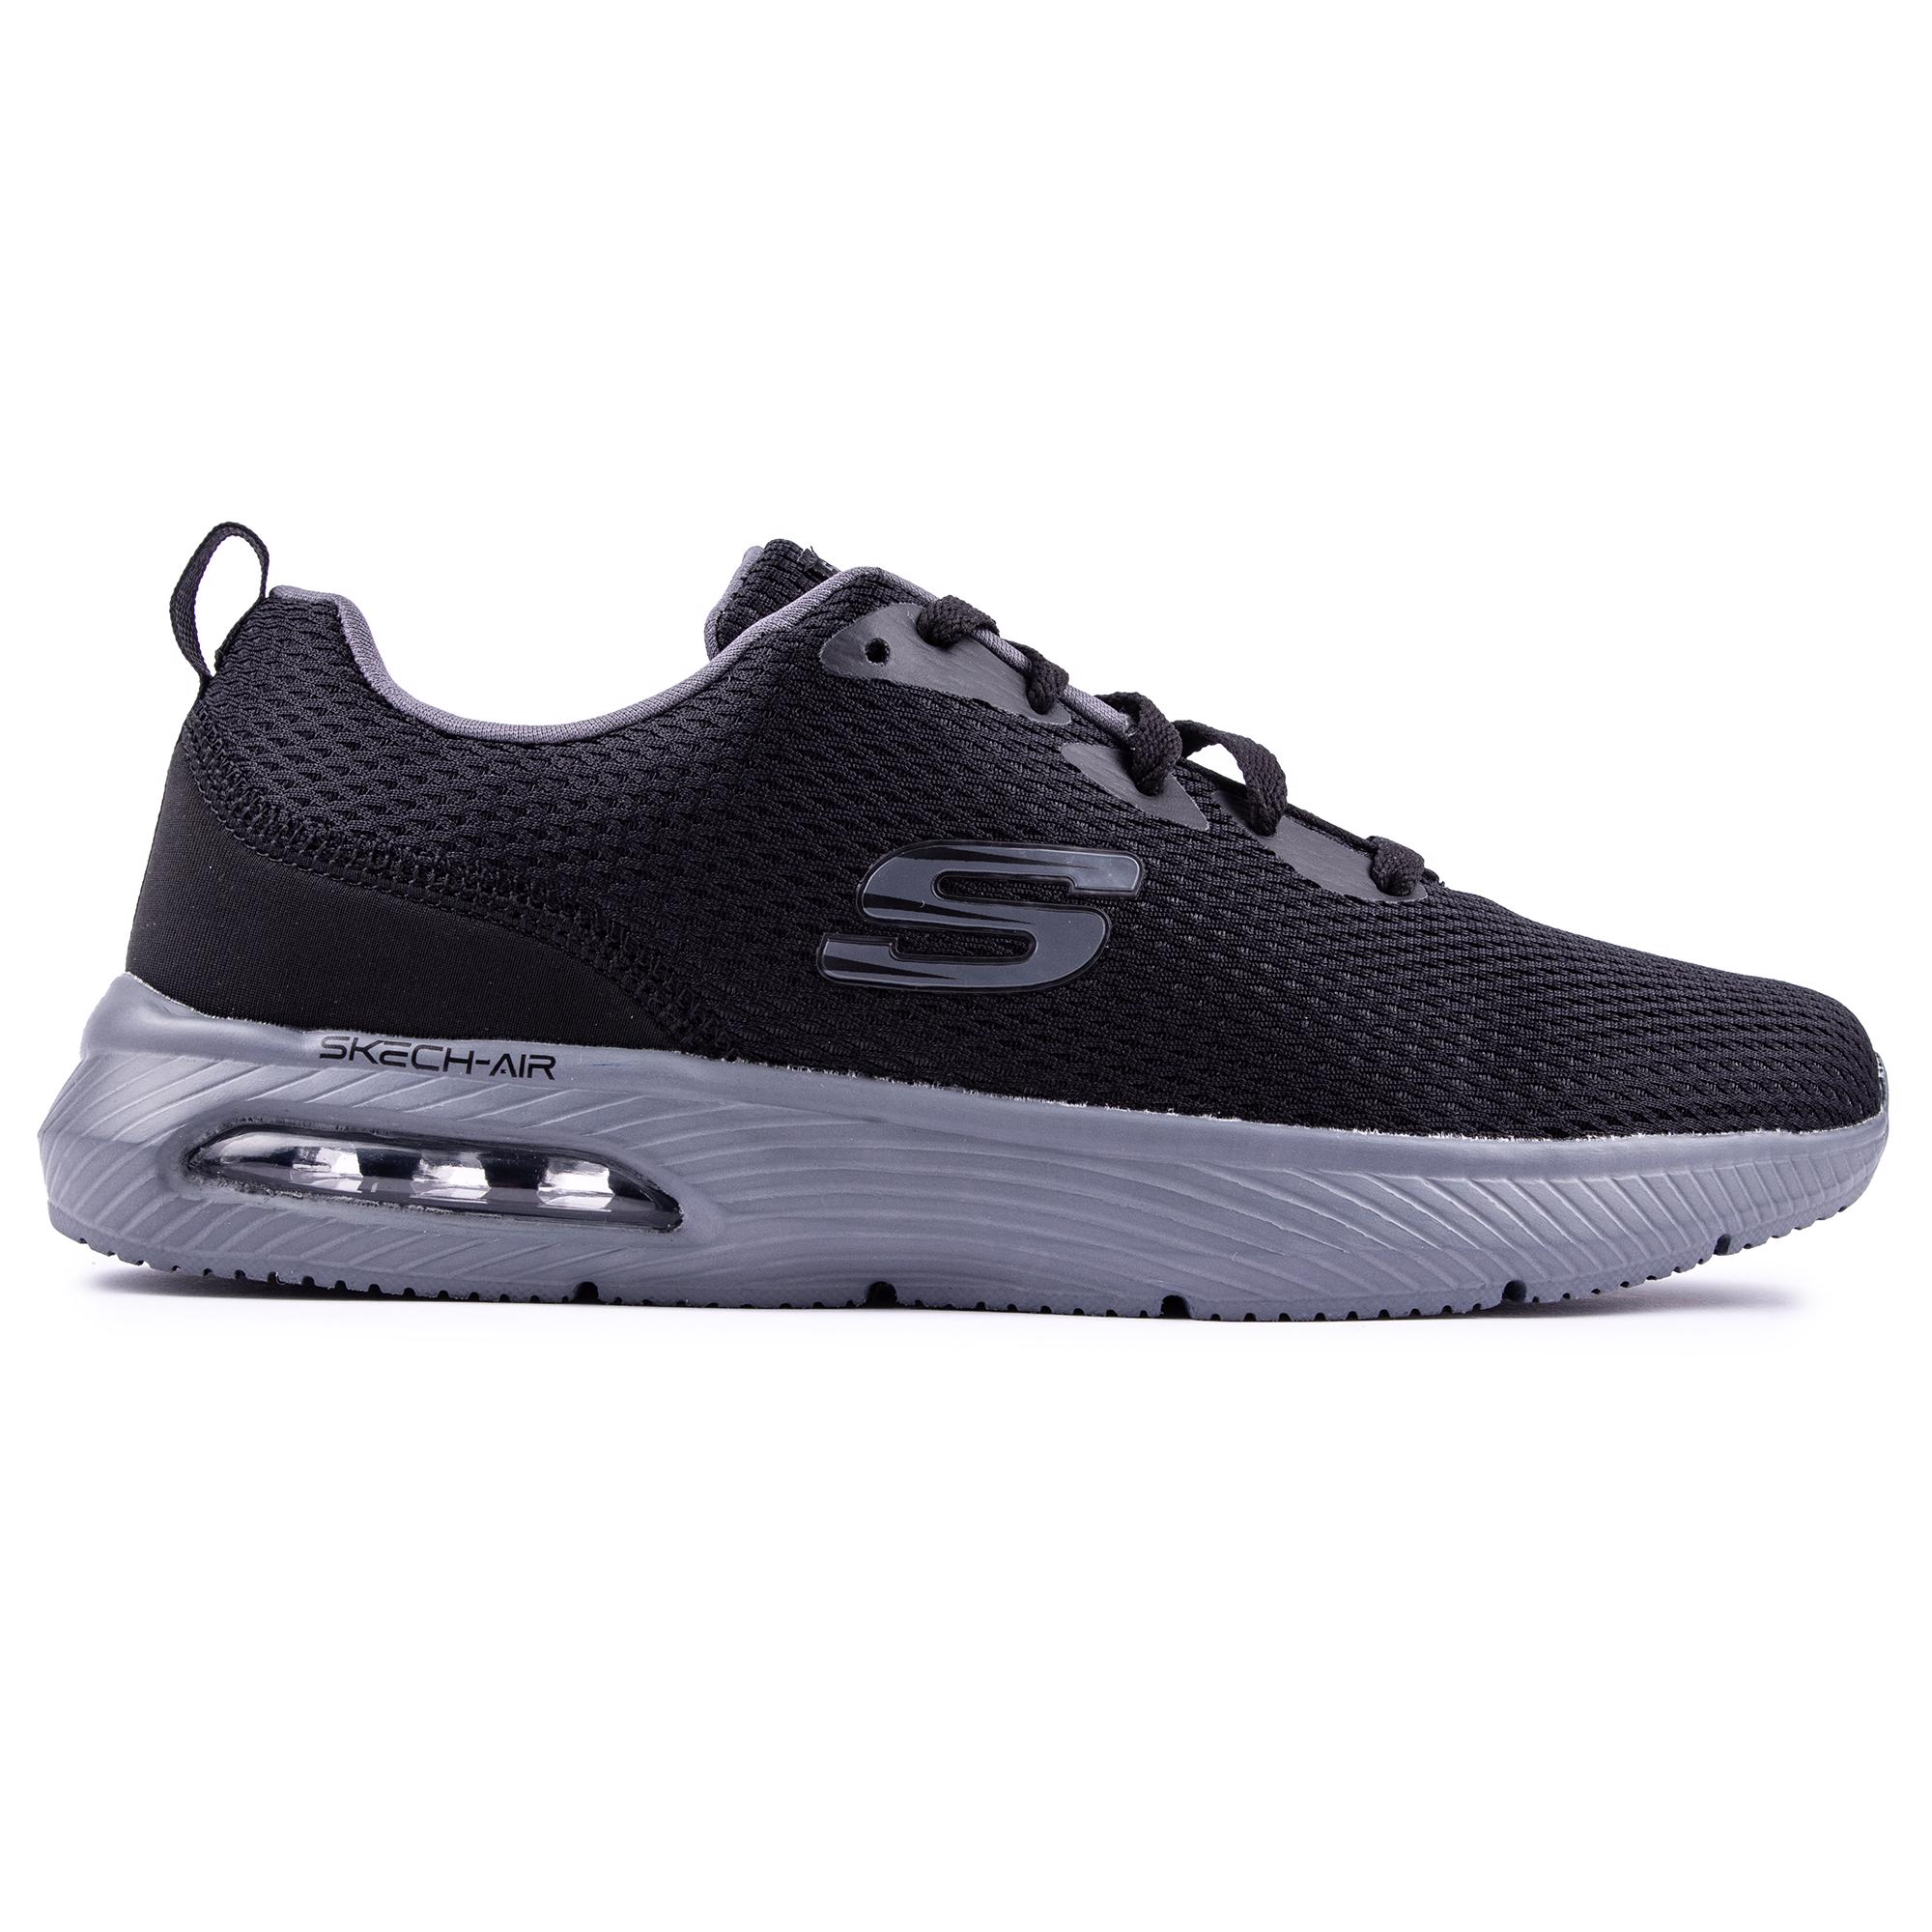 SKECHERS Mens Dyna-air Running Style Trainers Black